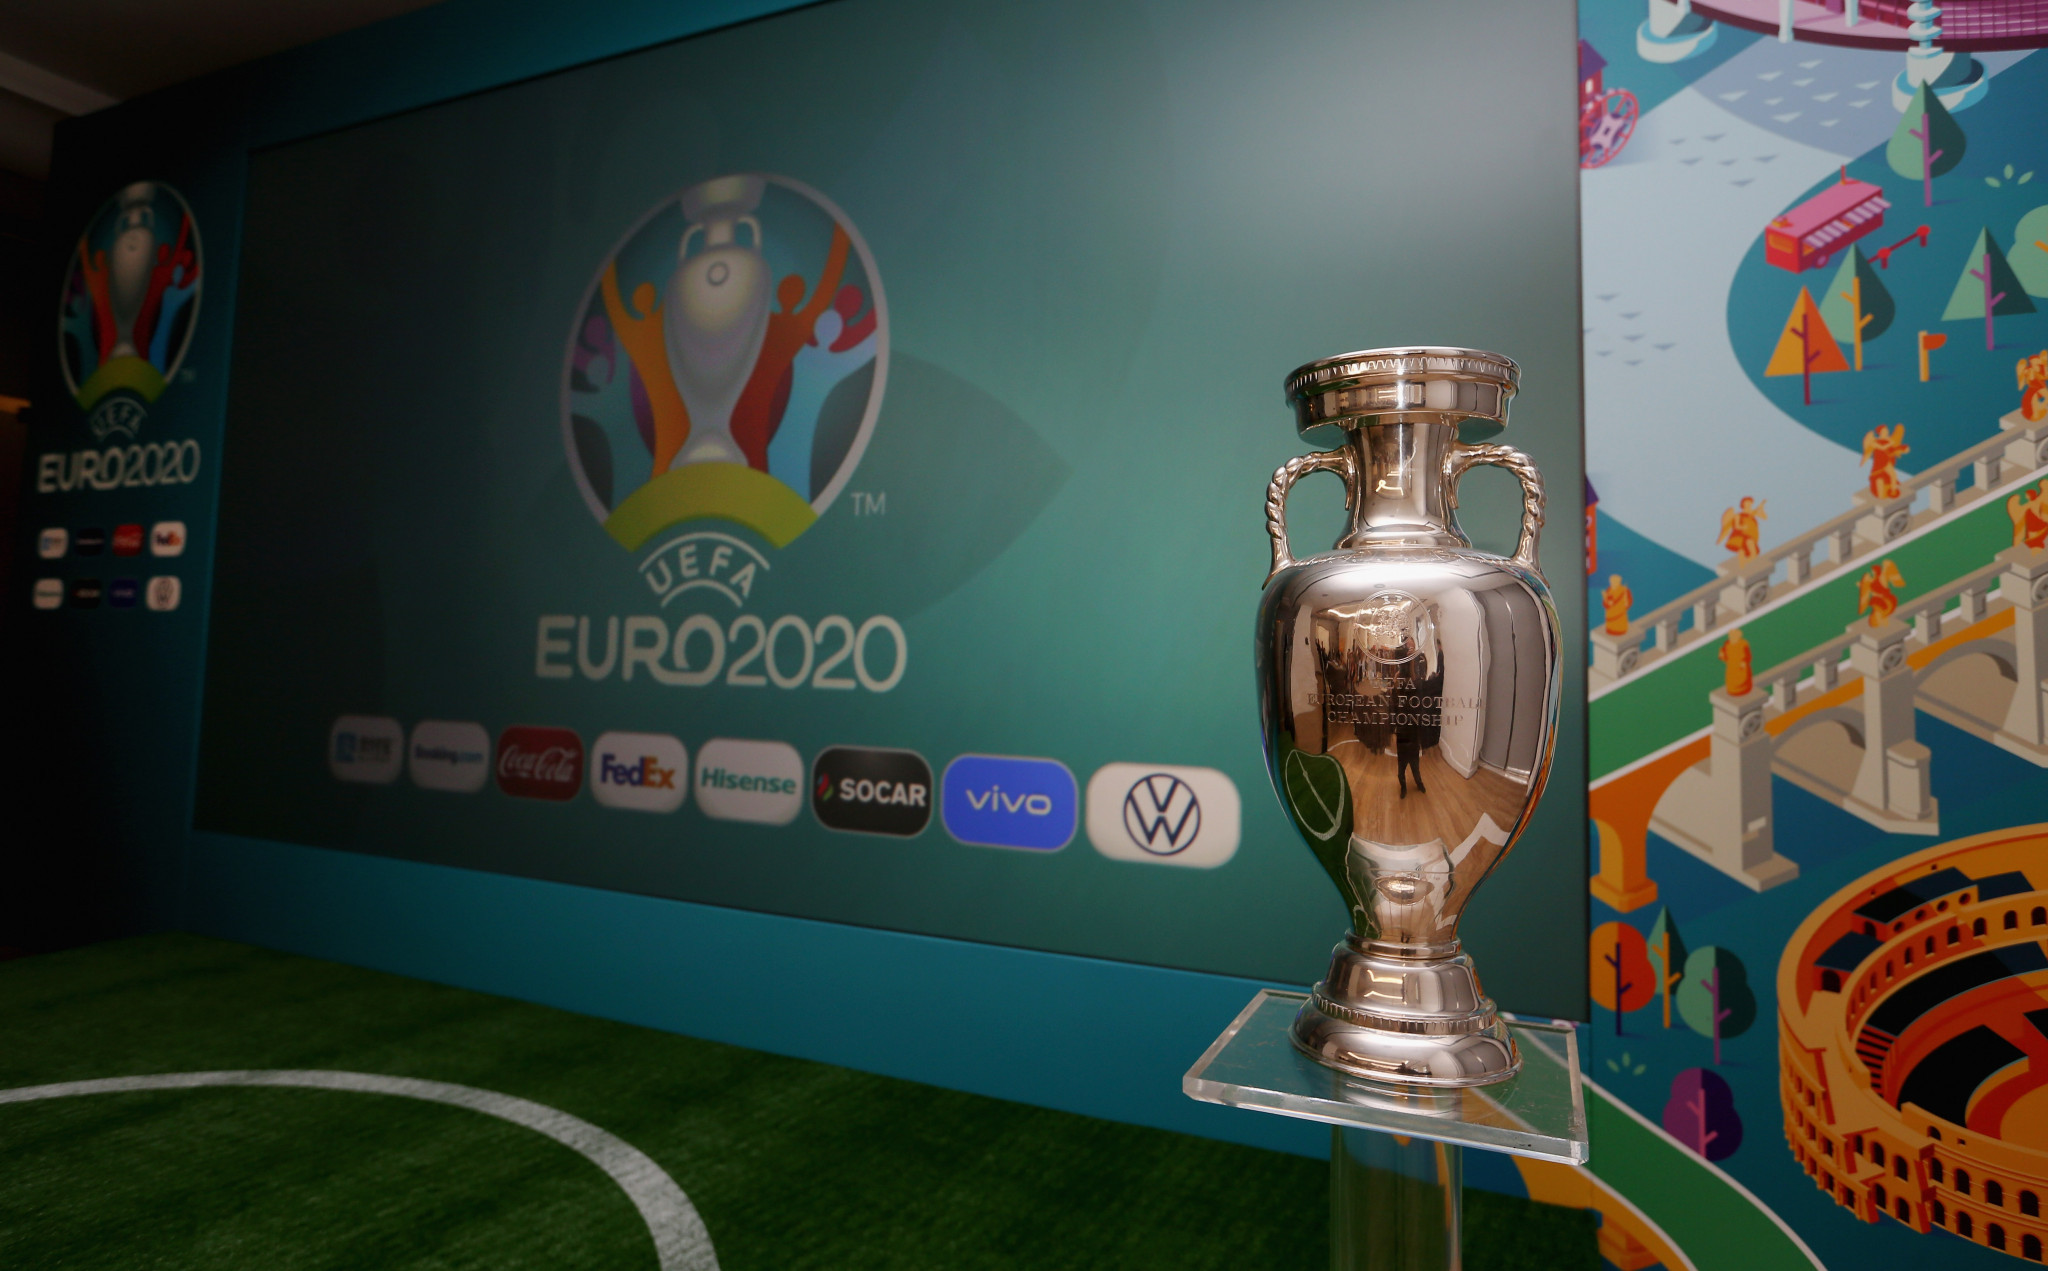 WADA confirm Russia to remain as host of matches at UEFA European Championship